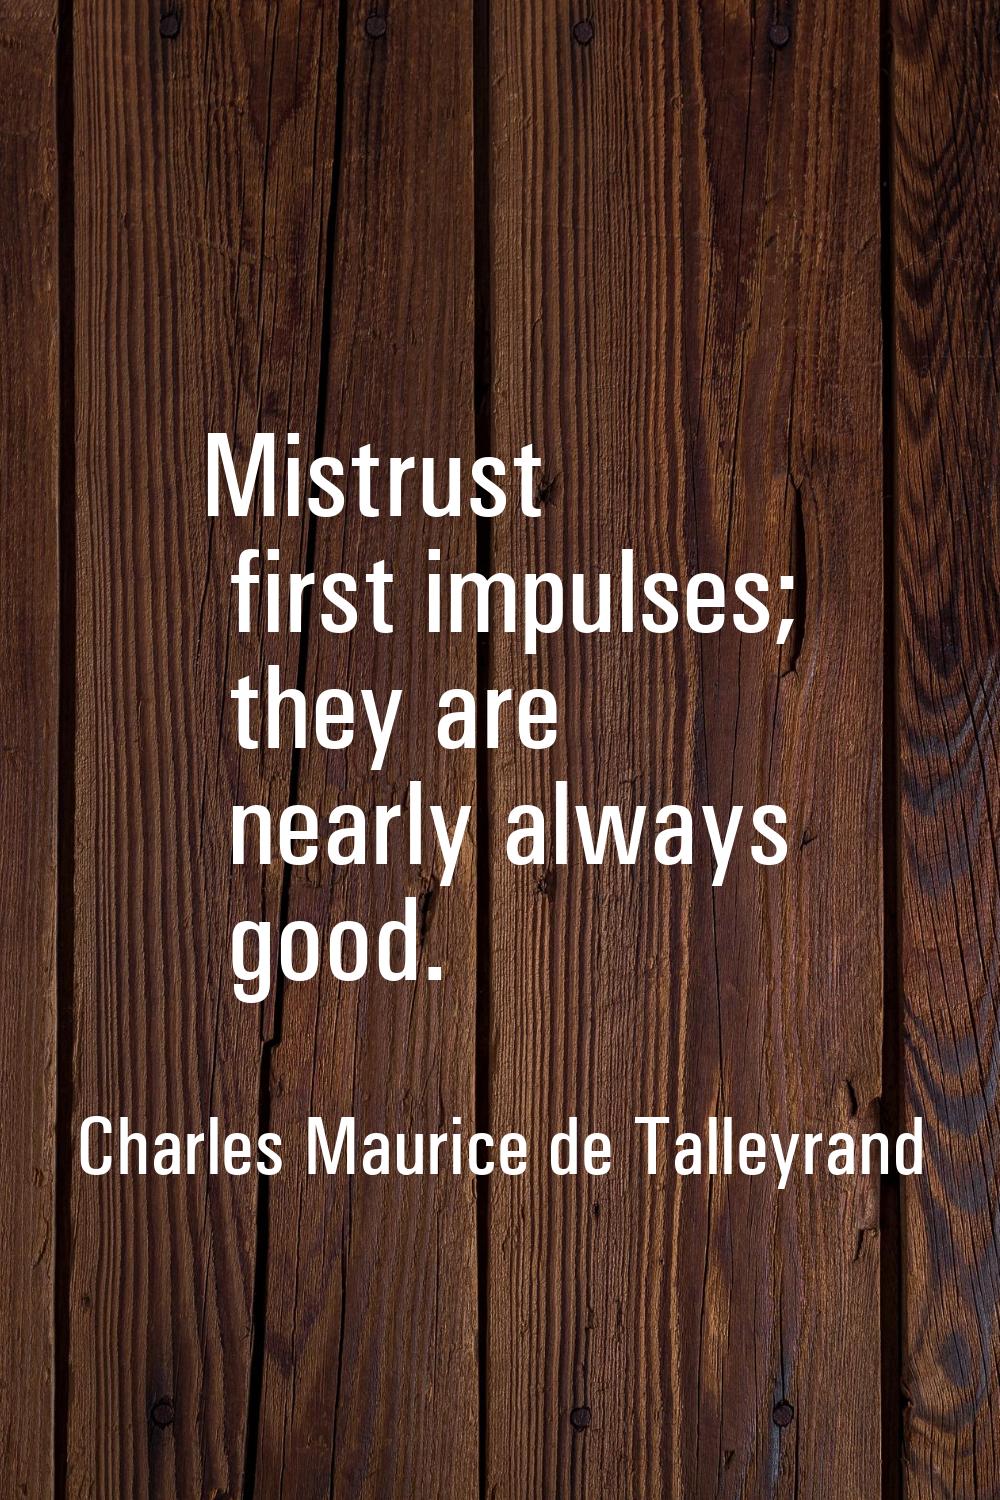 Mistrust first impulses; they are nearly always good.